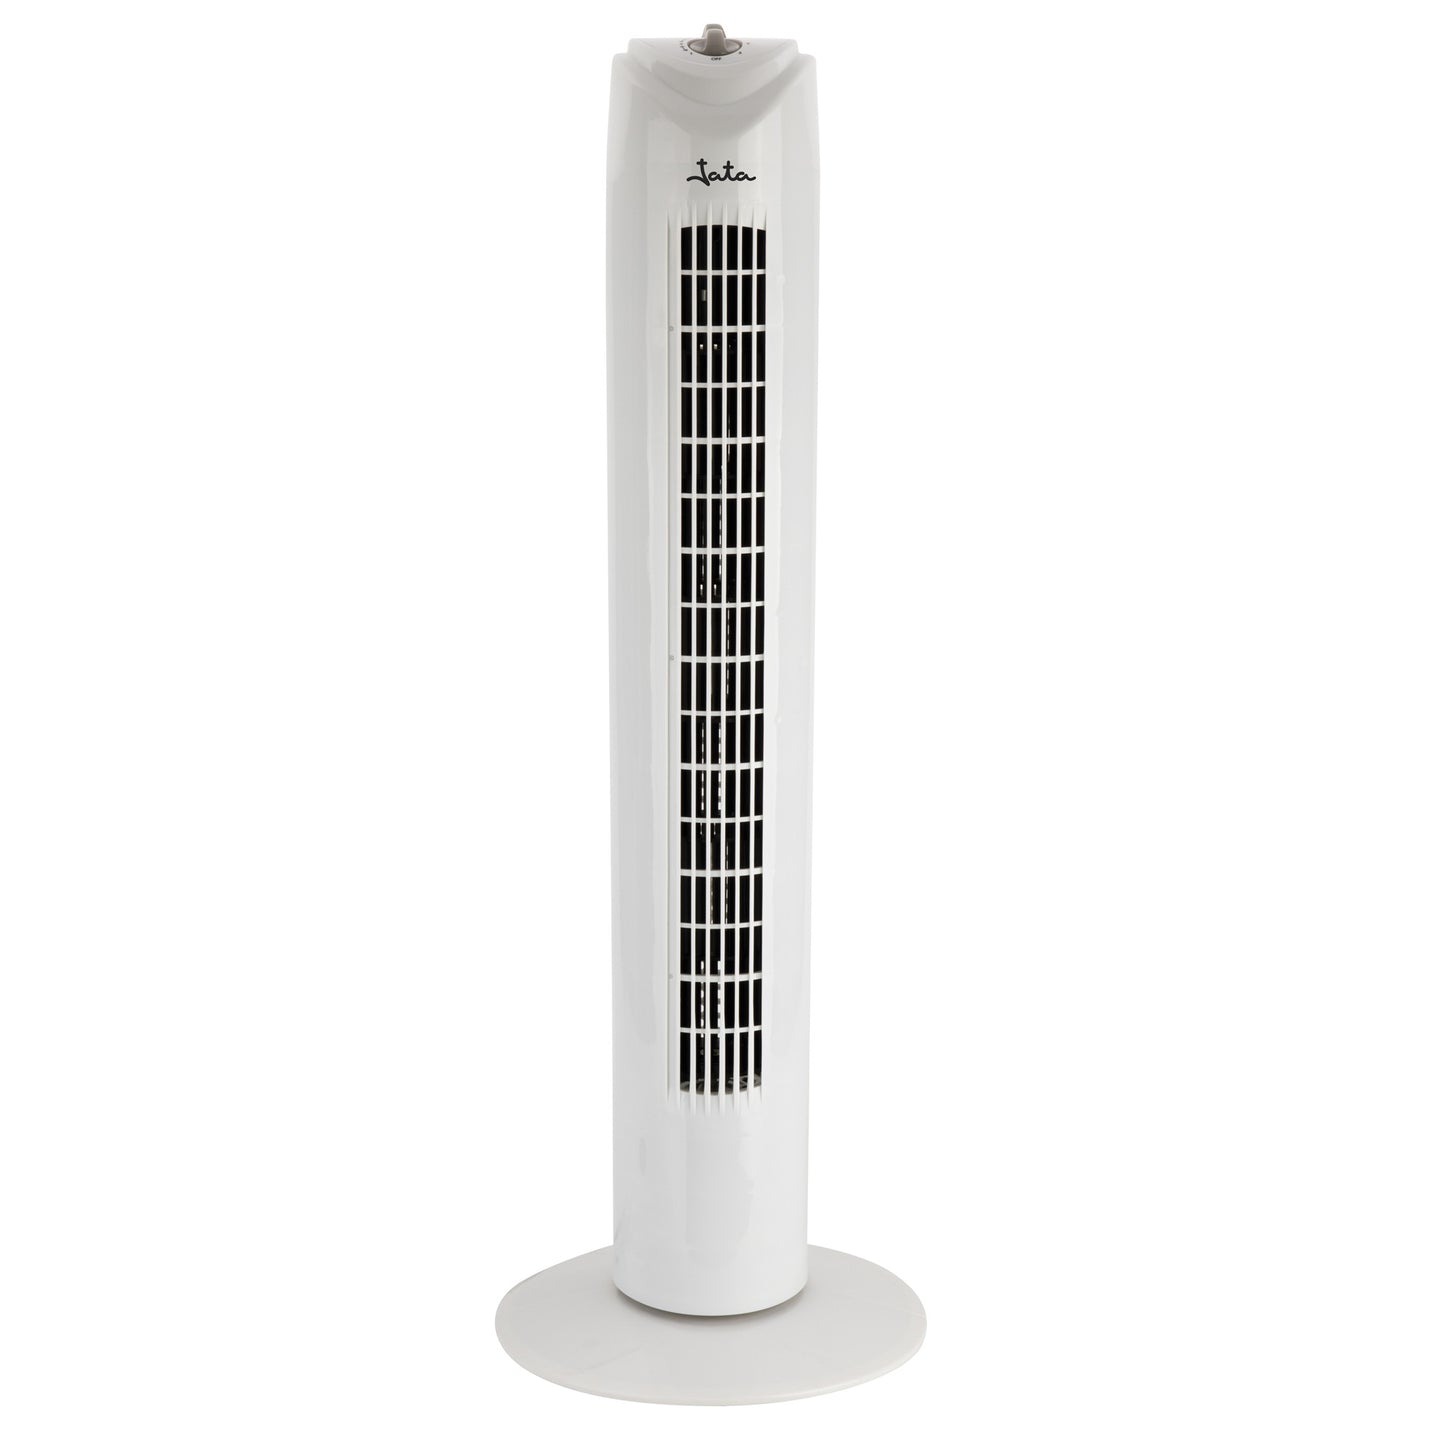 Tower fan with carrying handle Jata JVVT3141